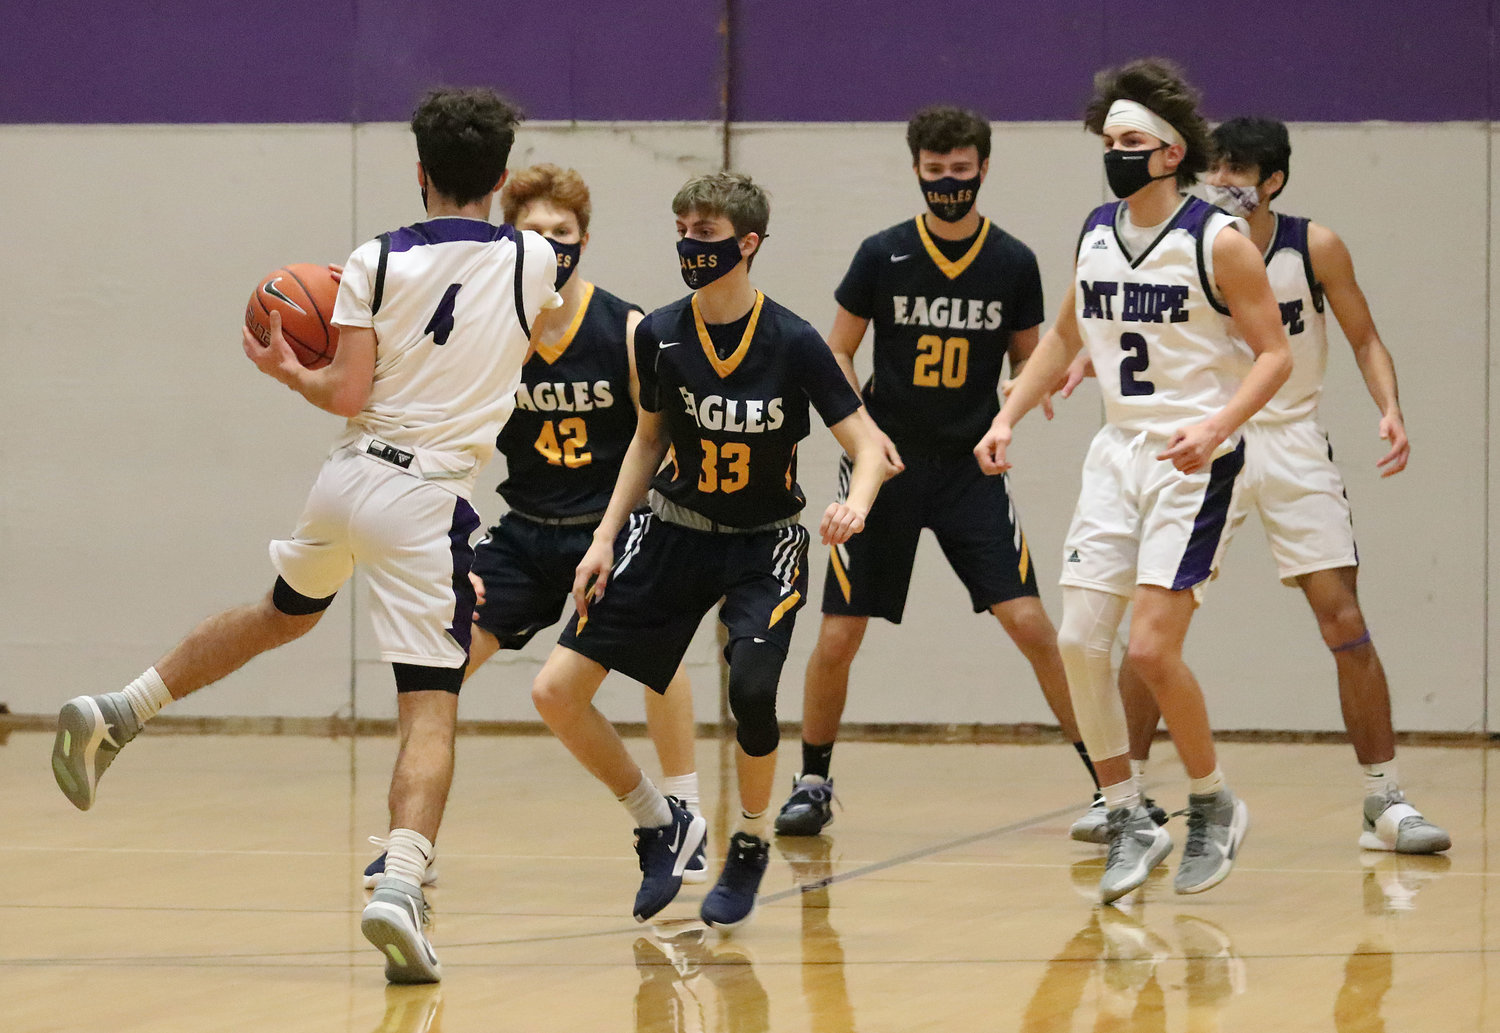 Barrington defenders Brigham Dunphy (left), Sean Bonneau, and Nick Scandura get into their defense as Mt. Hope's Parker Camelo brings up the ball during a non-league game in Bristol on Monday night. Barrington won 77-40.